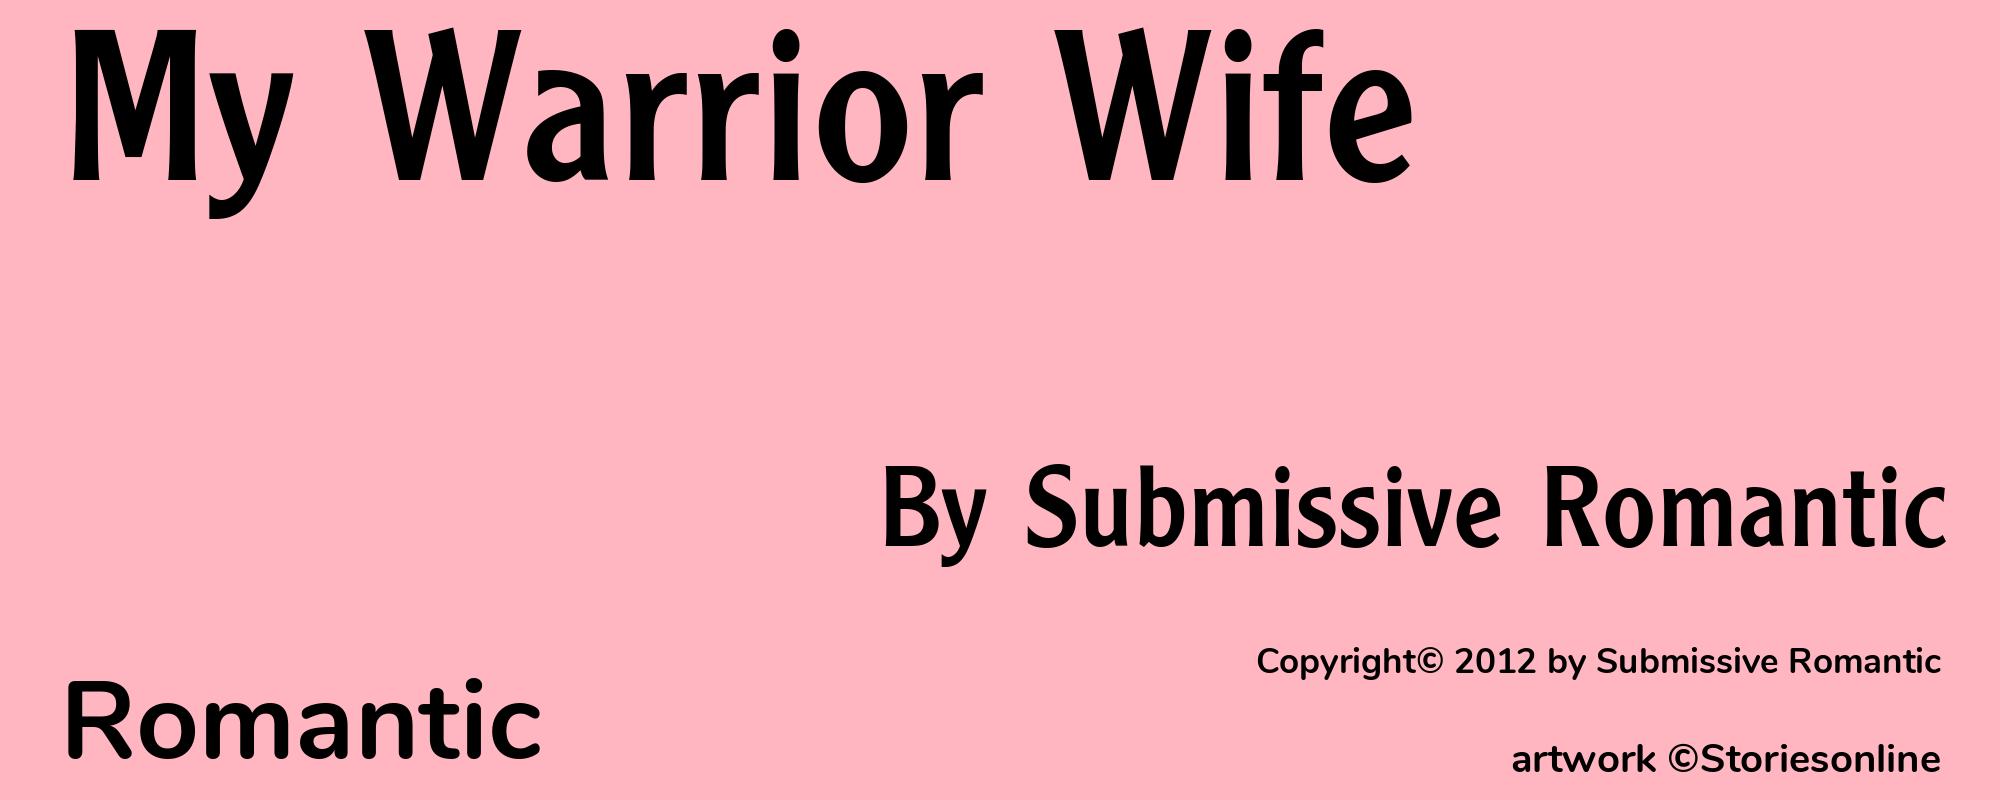 My Warrior Wife - Cover